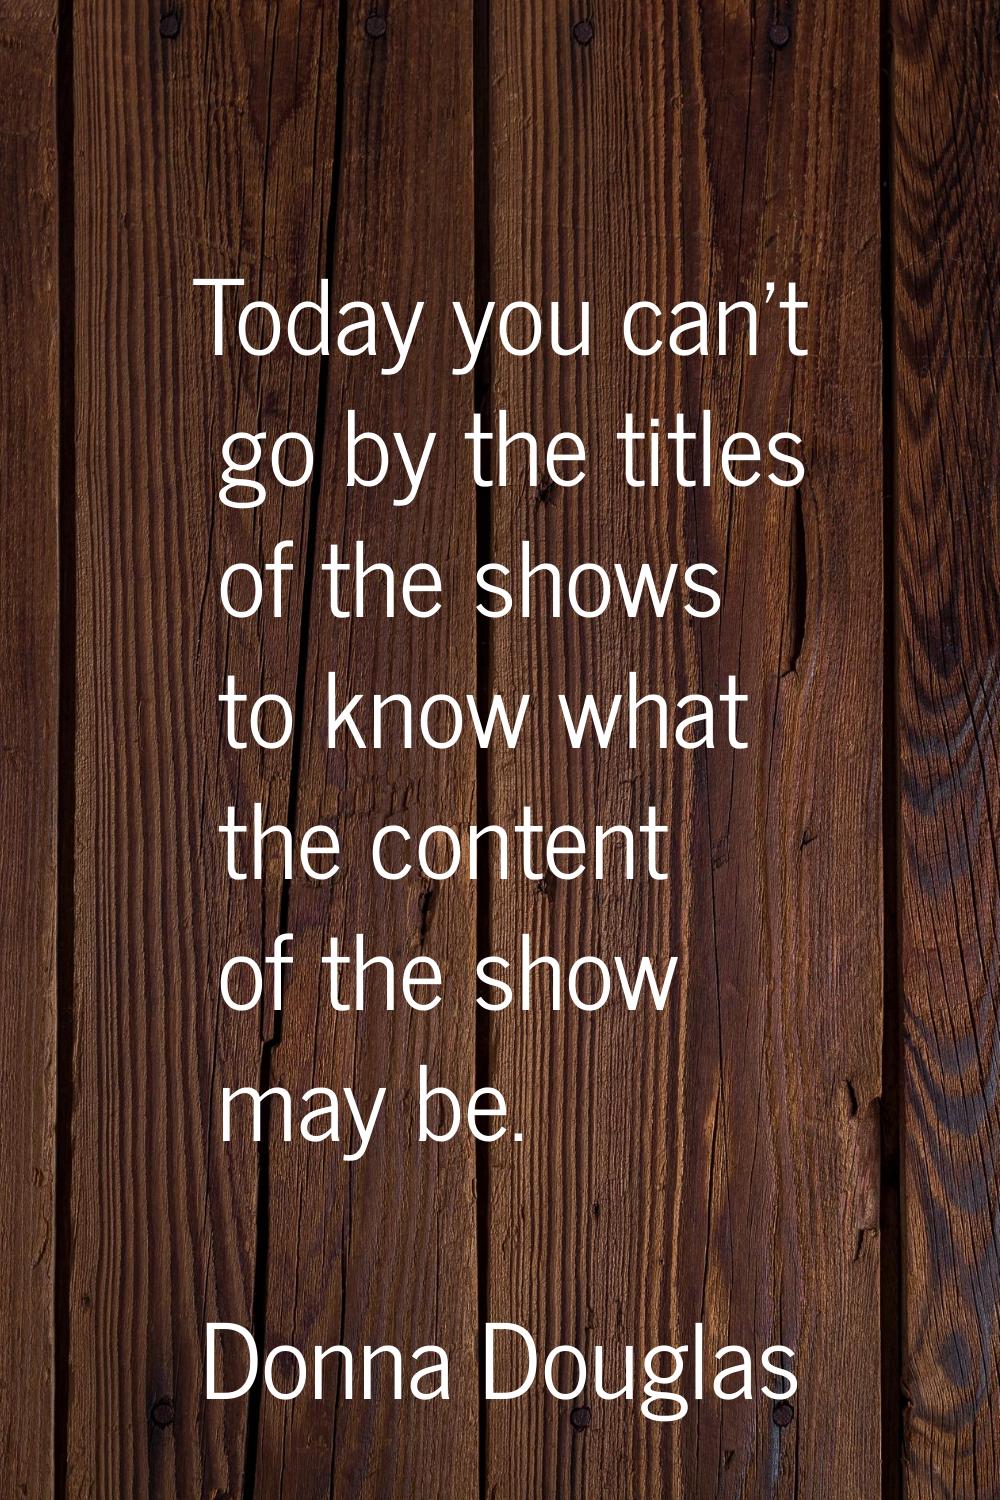 Today you can't go by the titles of the shows to know what the content of the show may be.